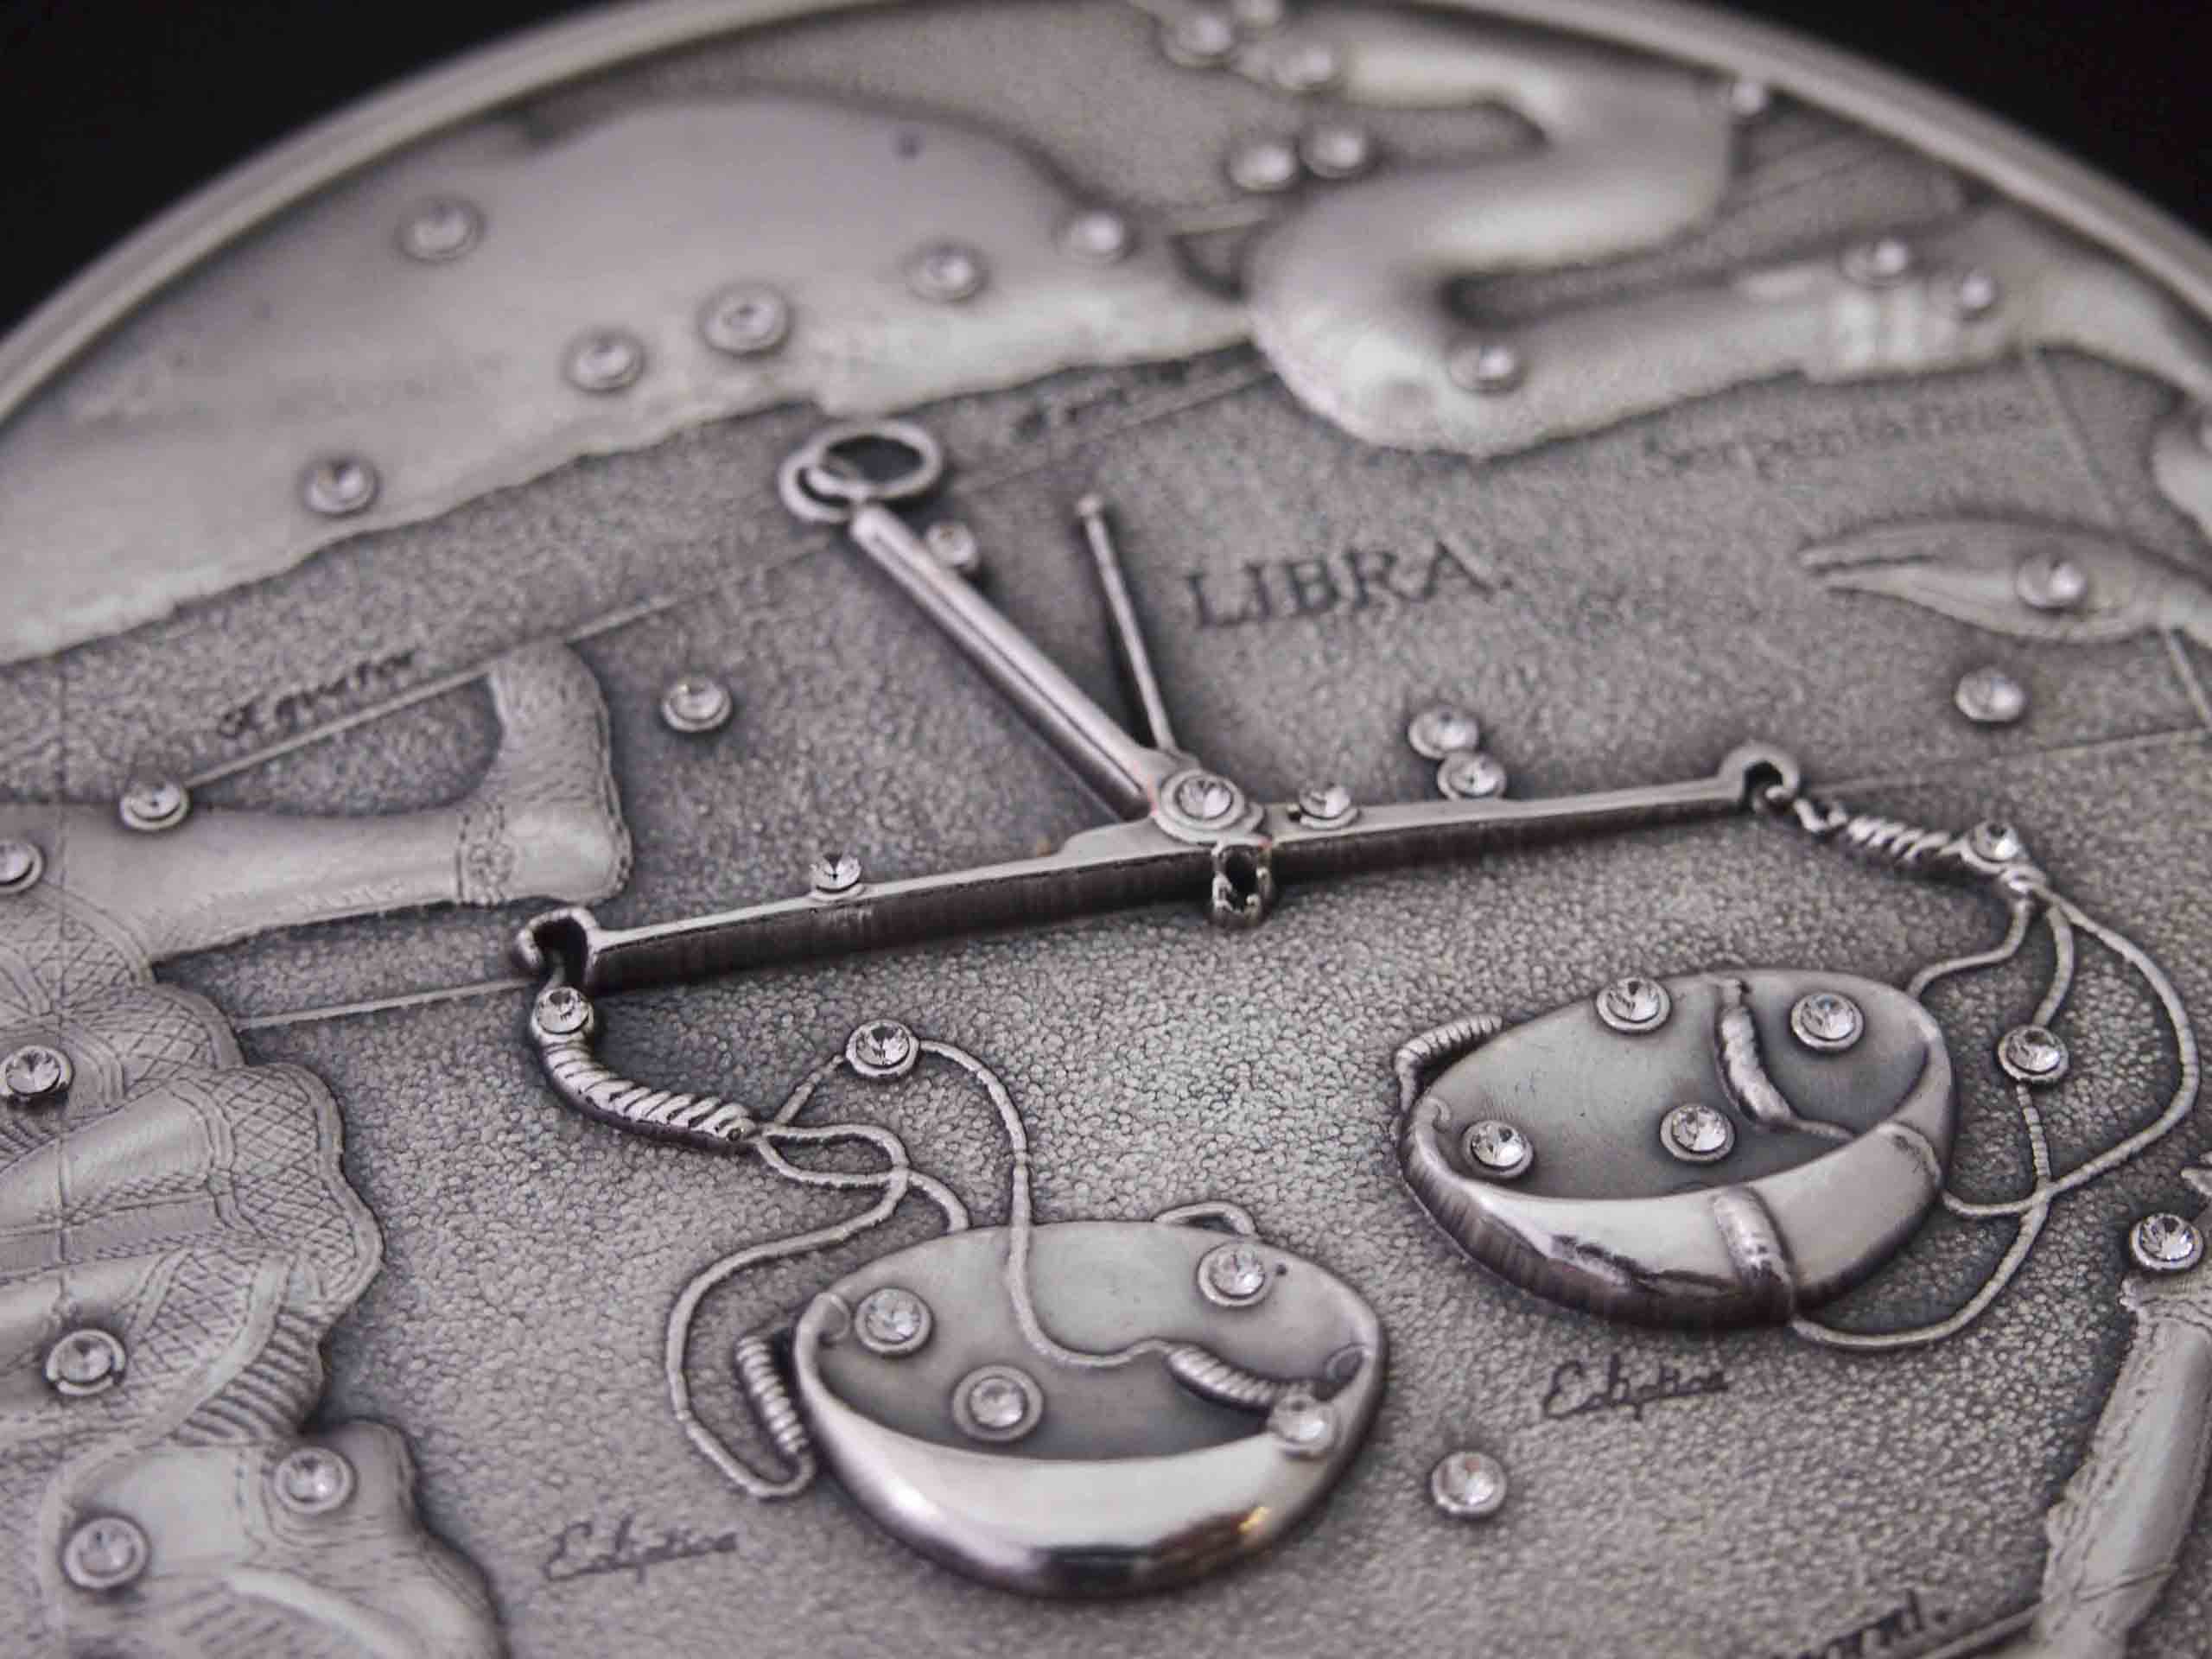 Libra on the coin wallpapers and images - wallpapers ...